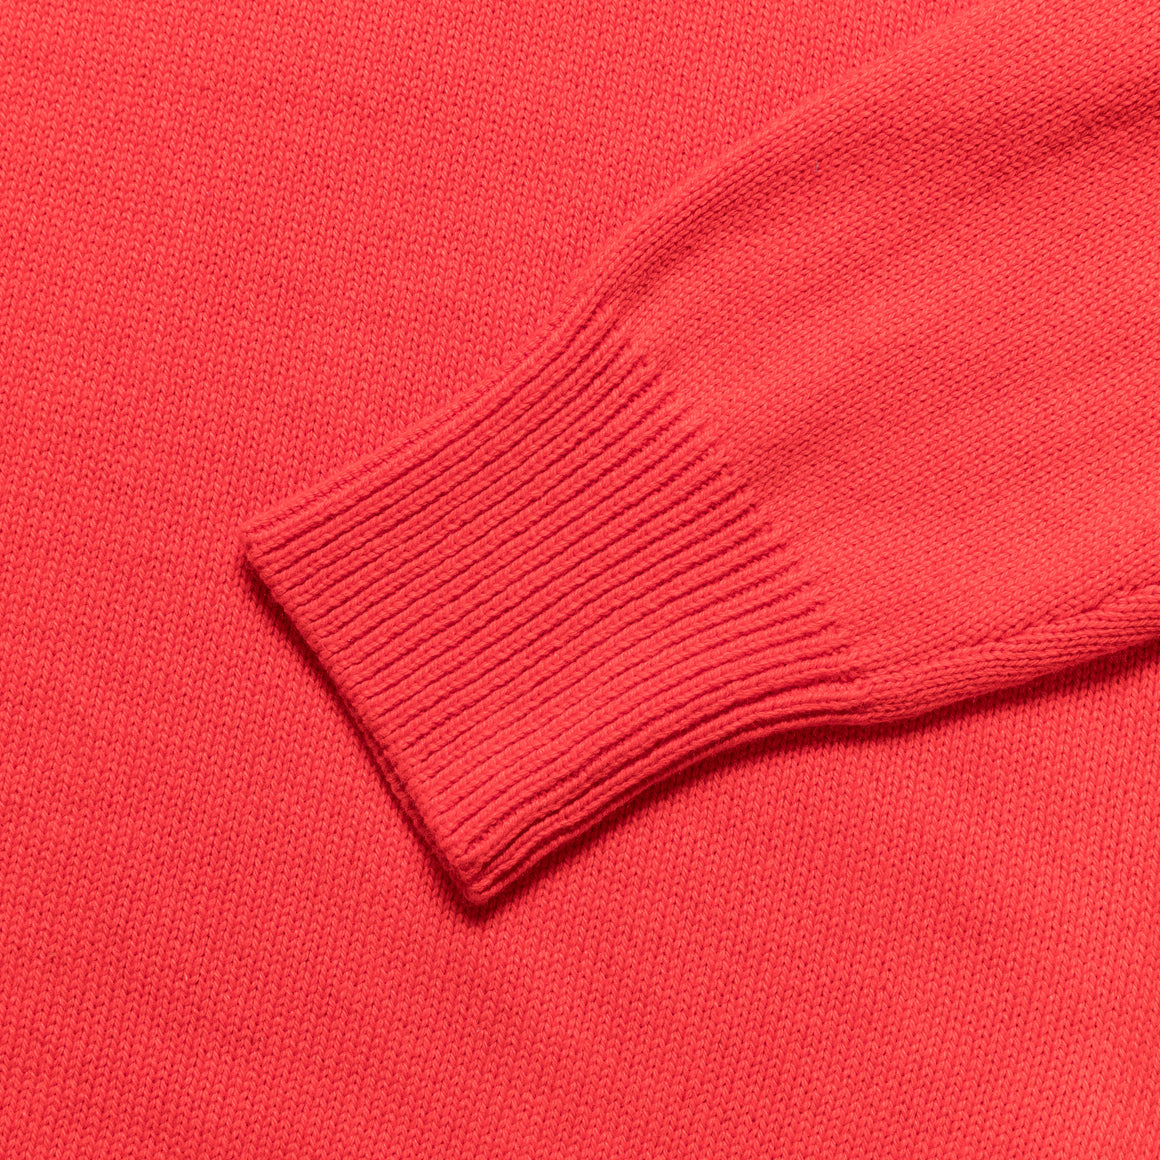 Adsum - Knit Polo LS - Garnet - UP THERE